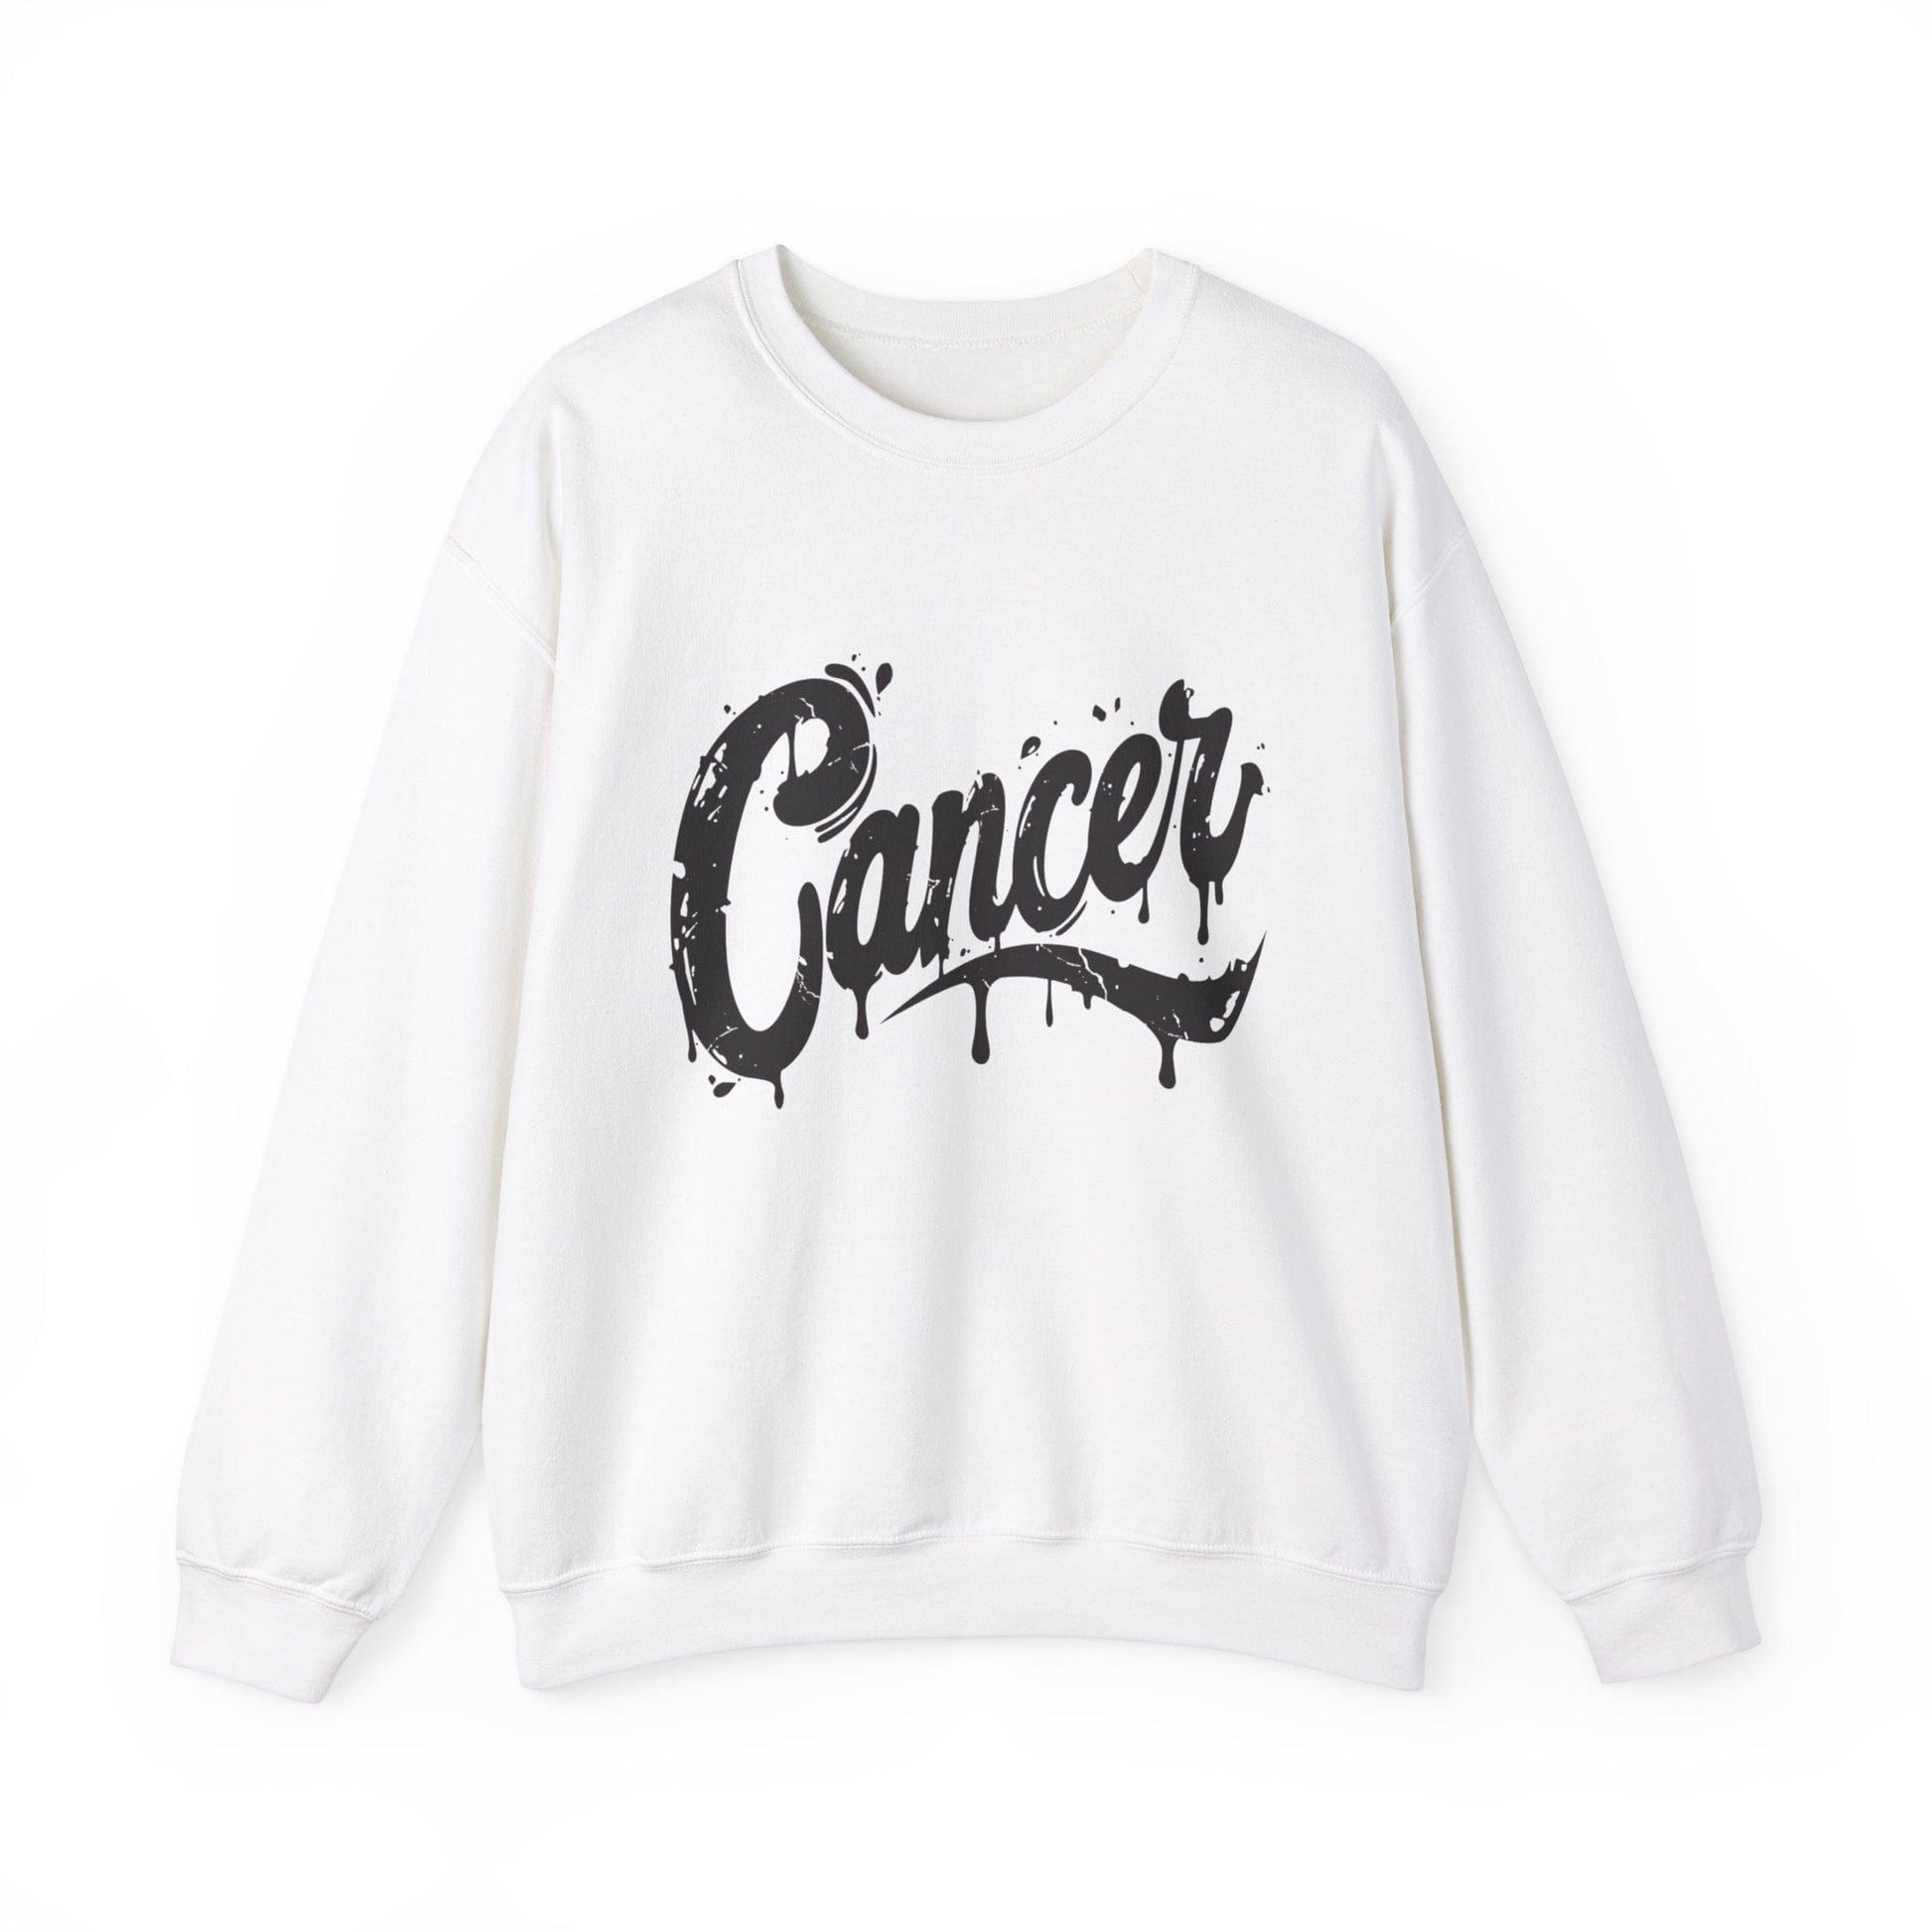 Sweatshirt S / White Tidal Emotion Cancer Sweater: Comfort in the Currents